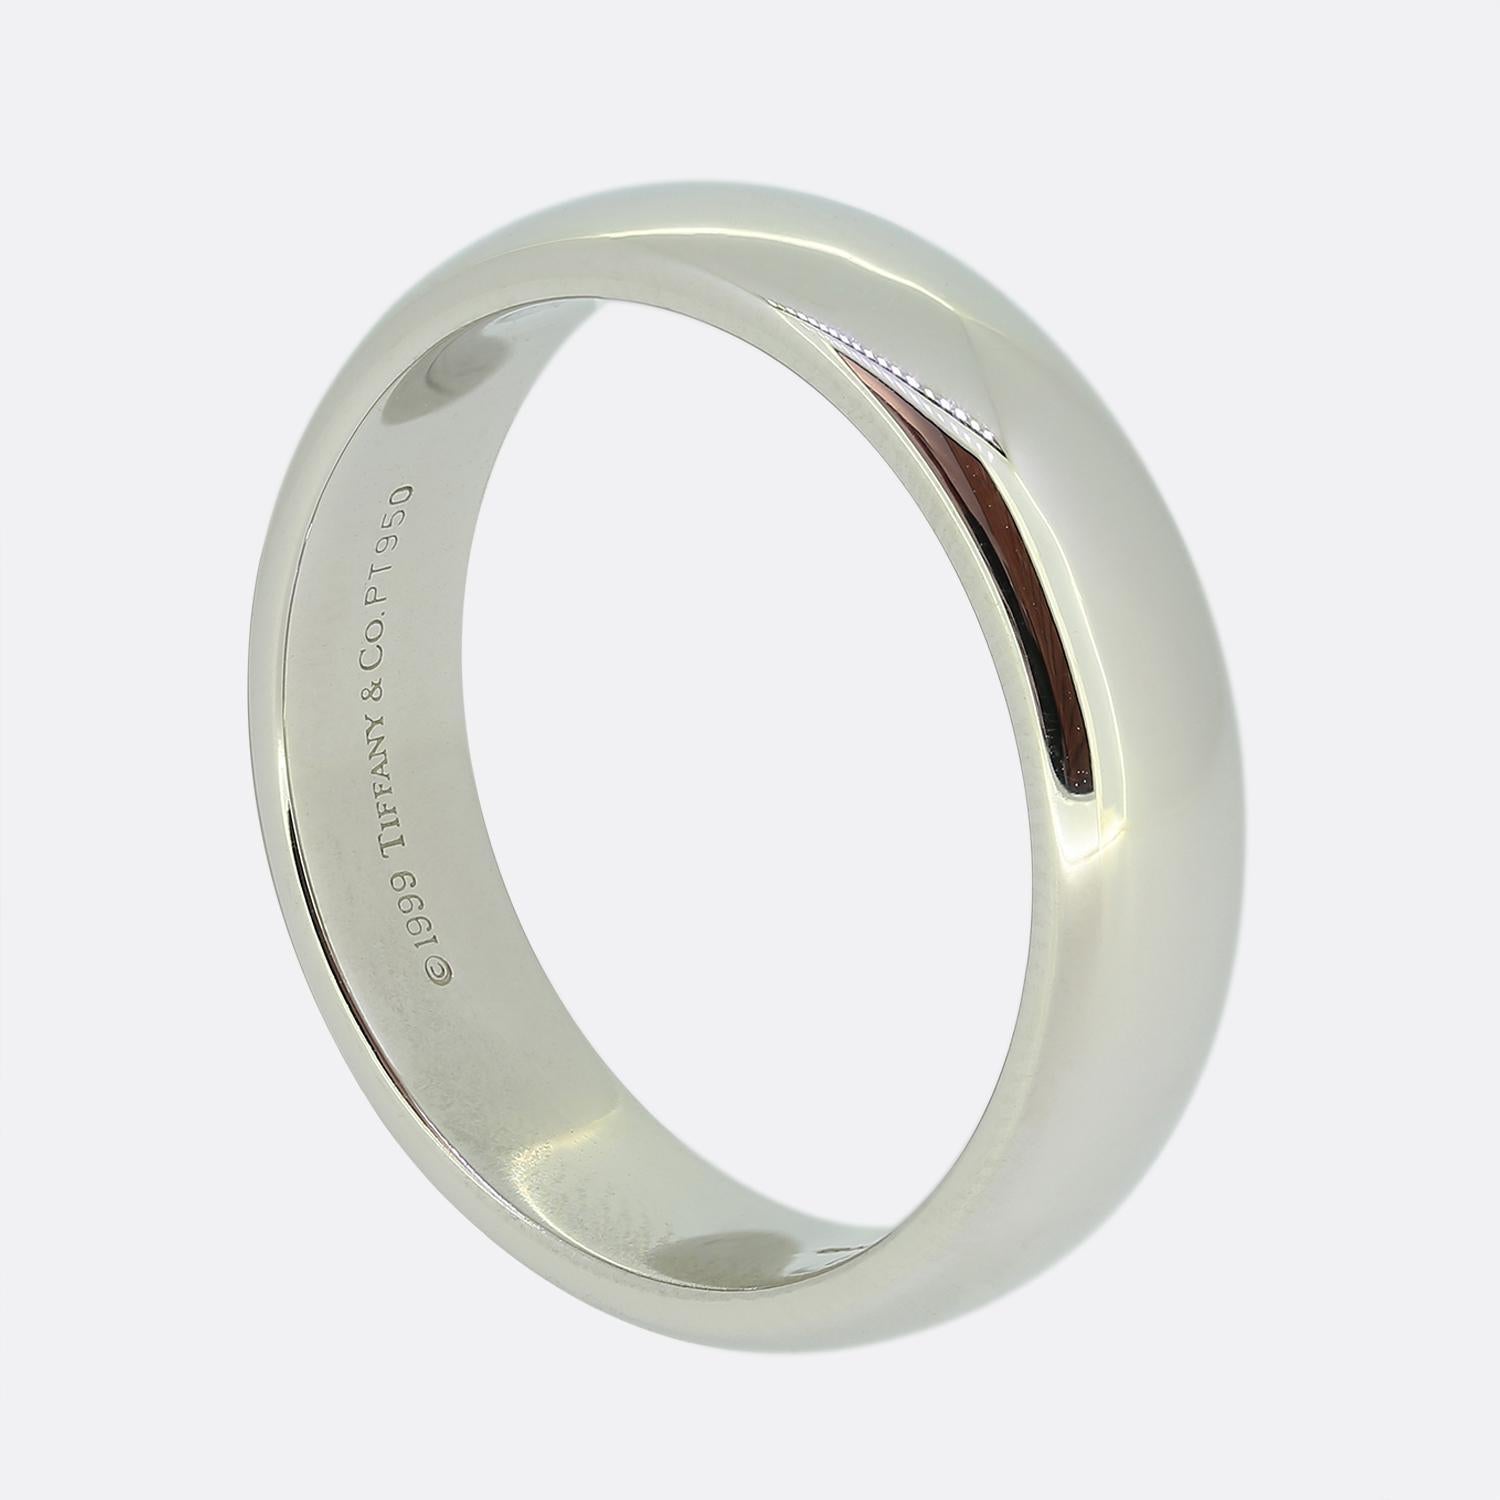 Here we have a classic plain polished wedding band ring from the world renowned jewellery designer, Tiffany & Co. This timeless piece has been crafted from platinum and is 5.5mm in width making it perfect for both men and women.

Condition: Used